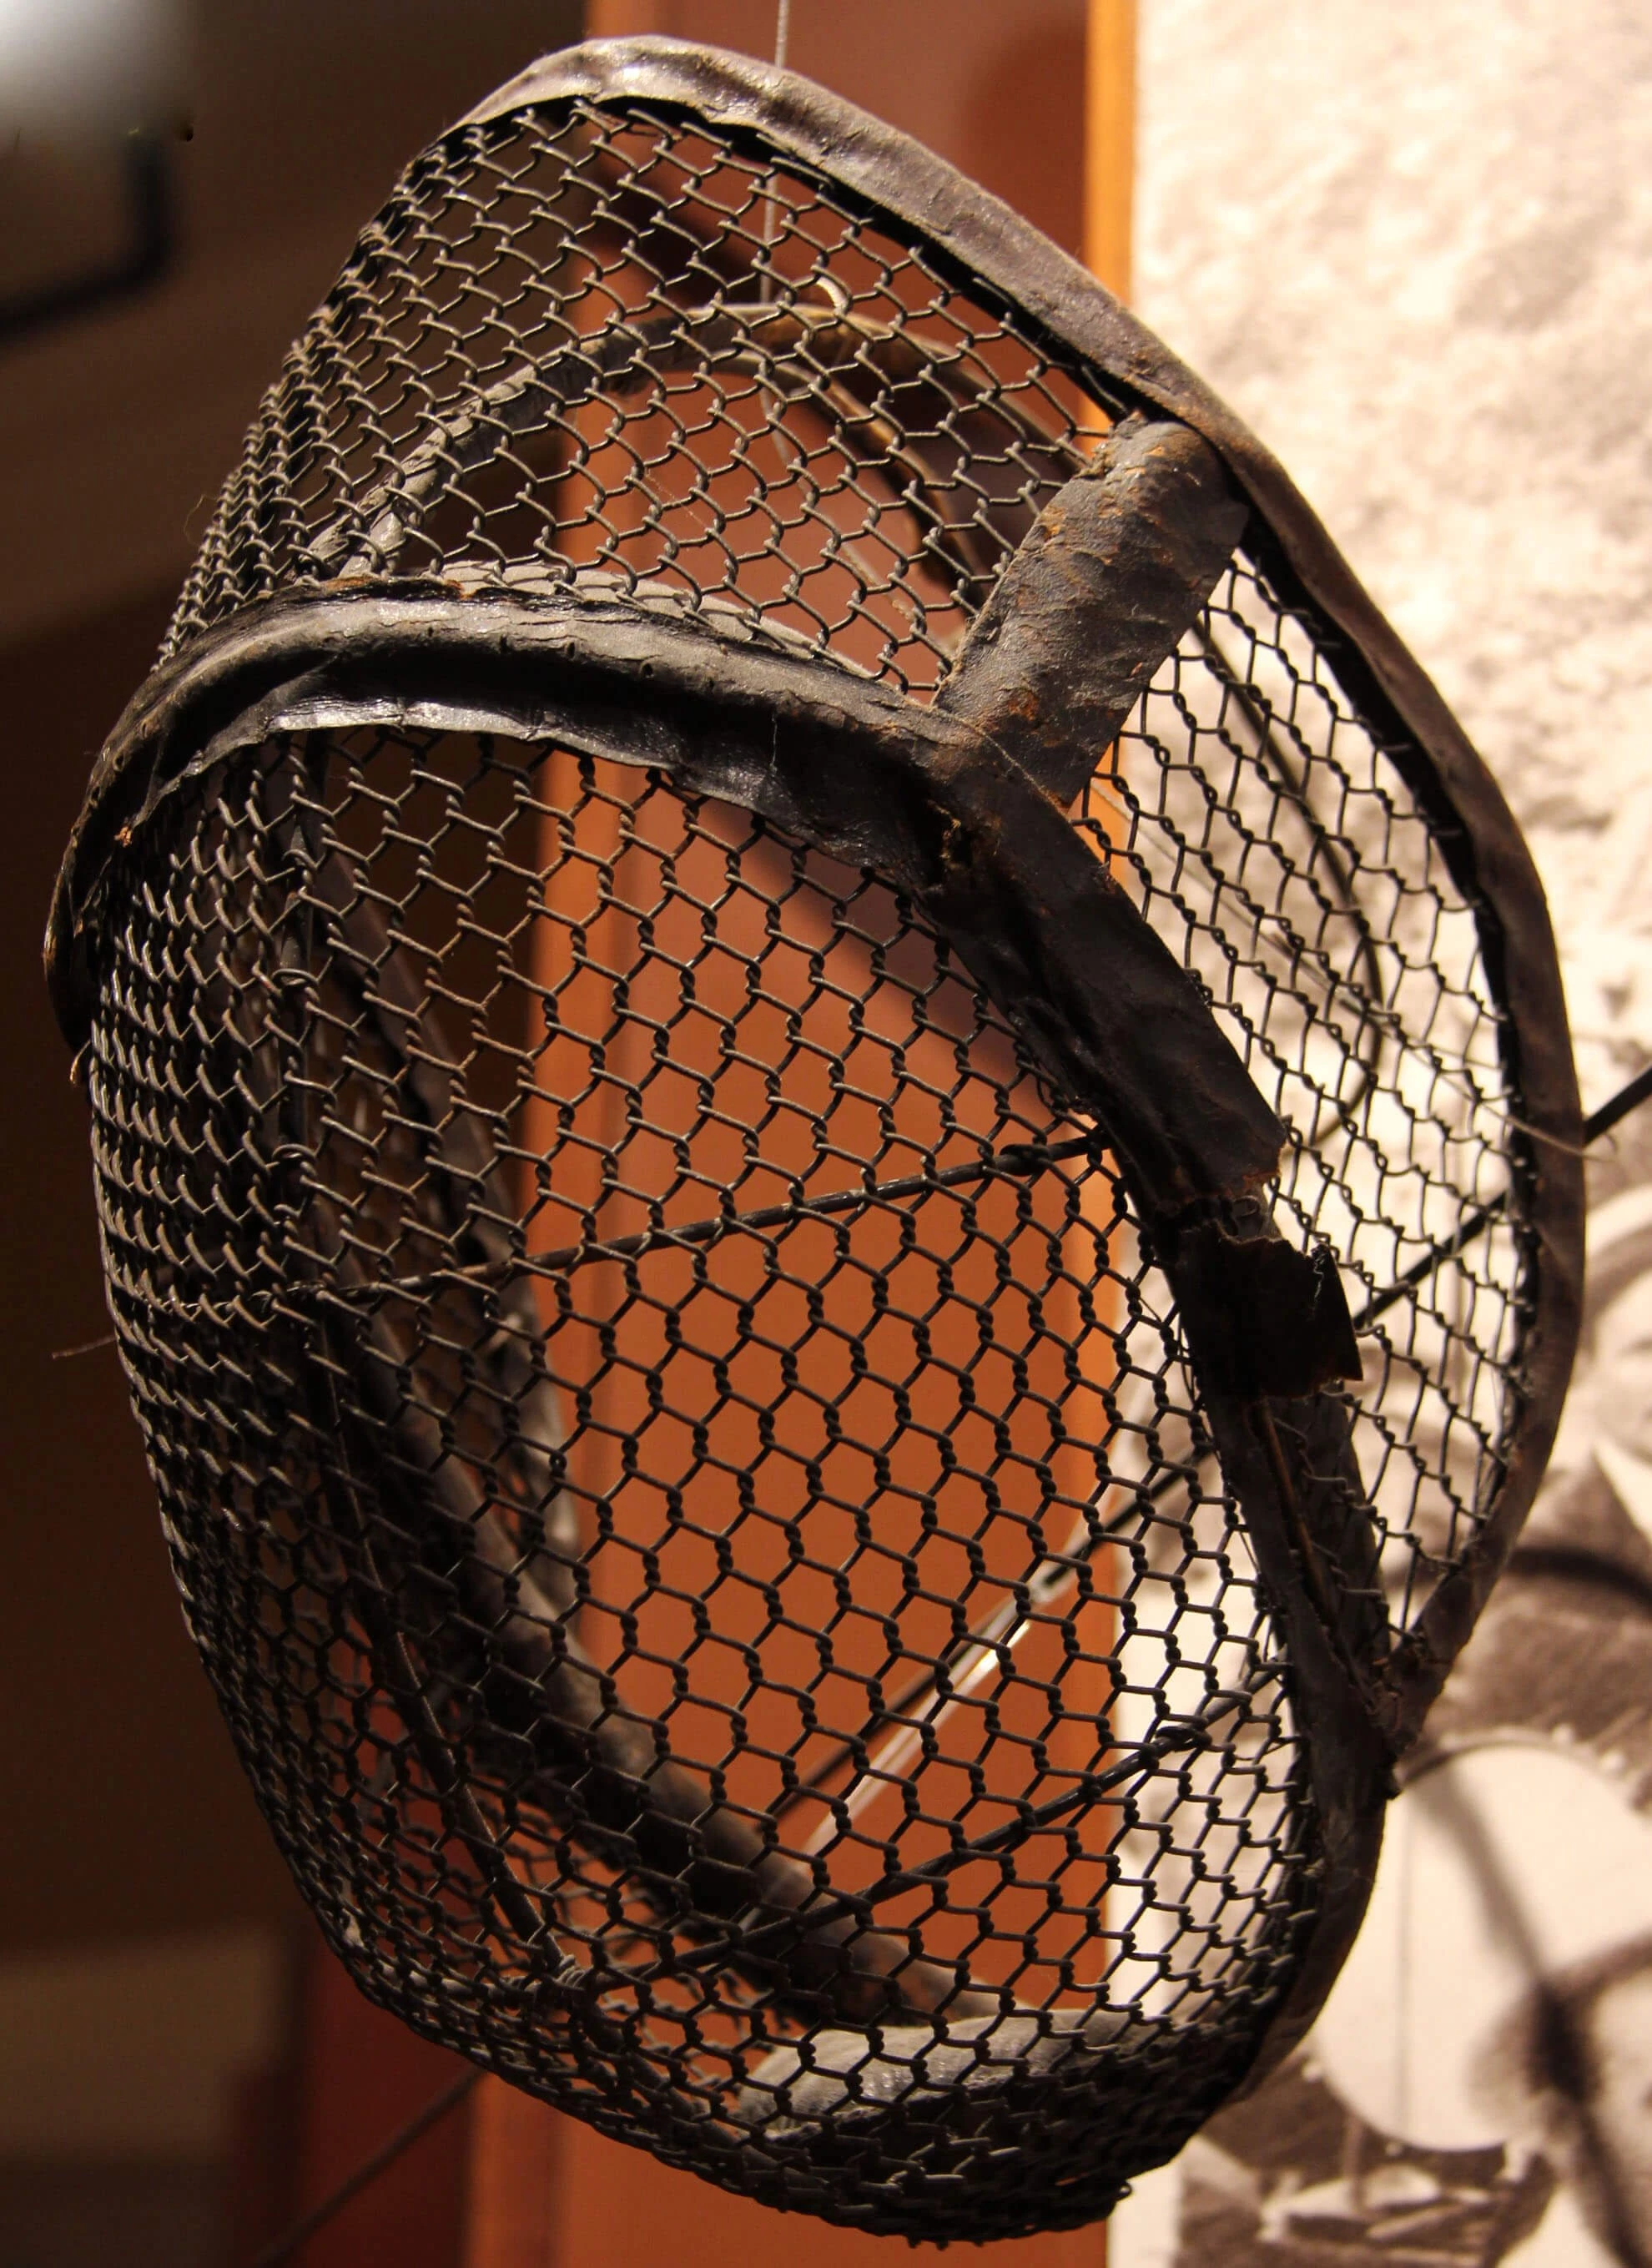 A sturdy black metal mesh cage that fits over ones head.